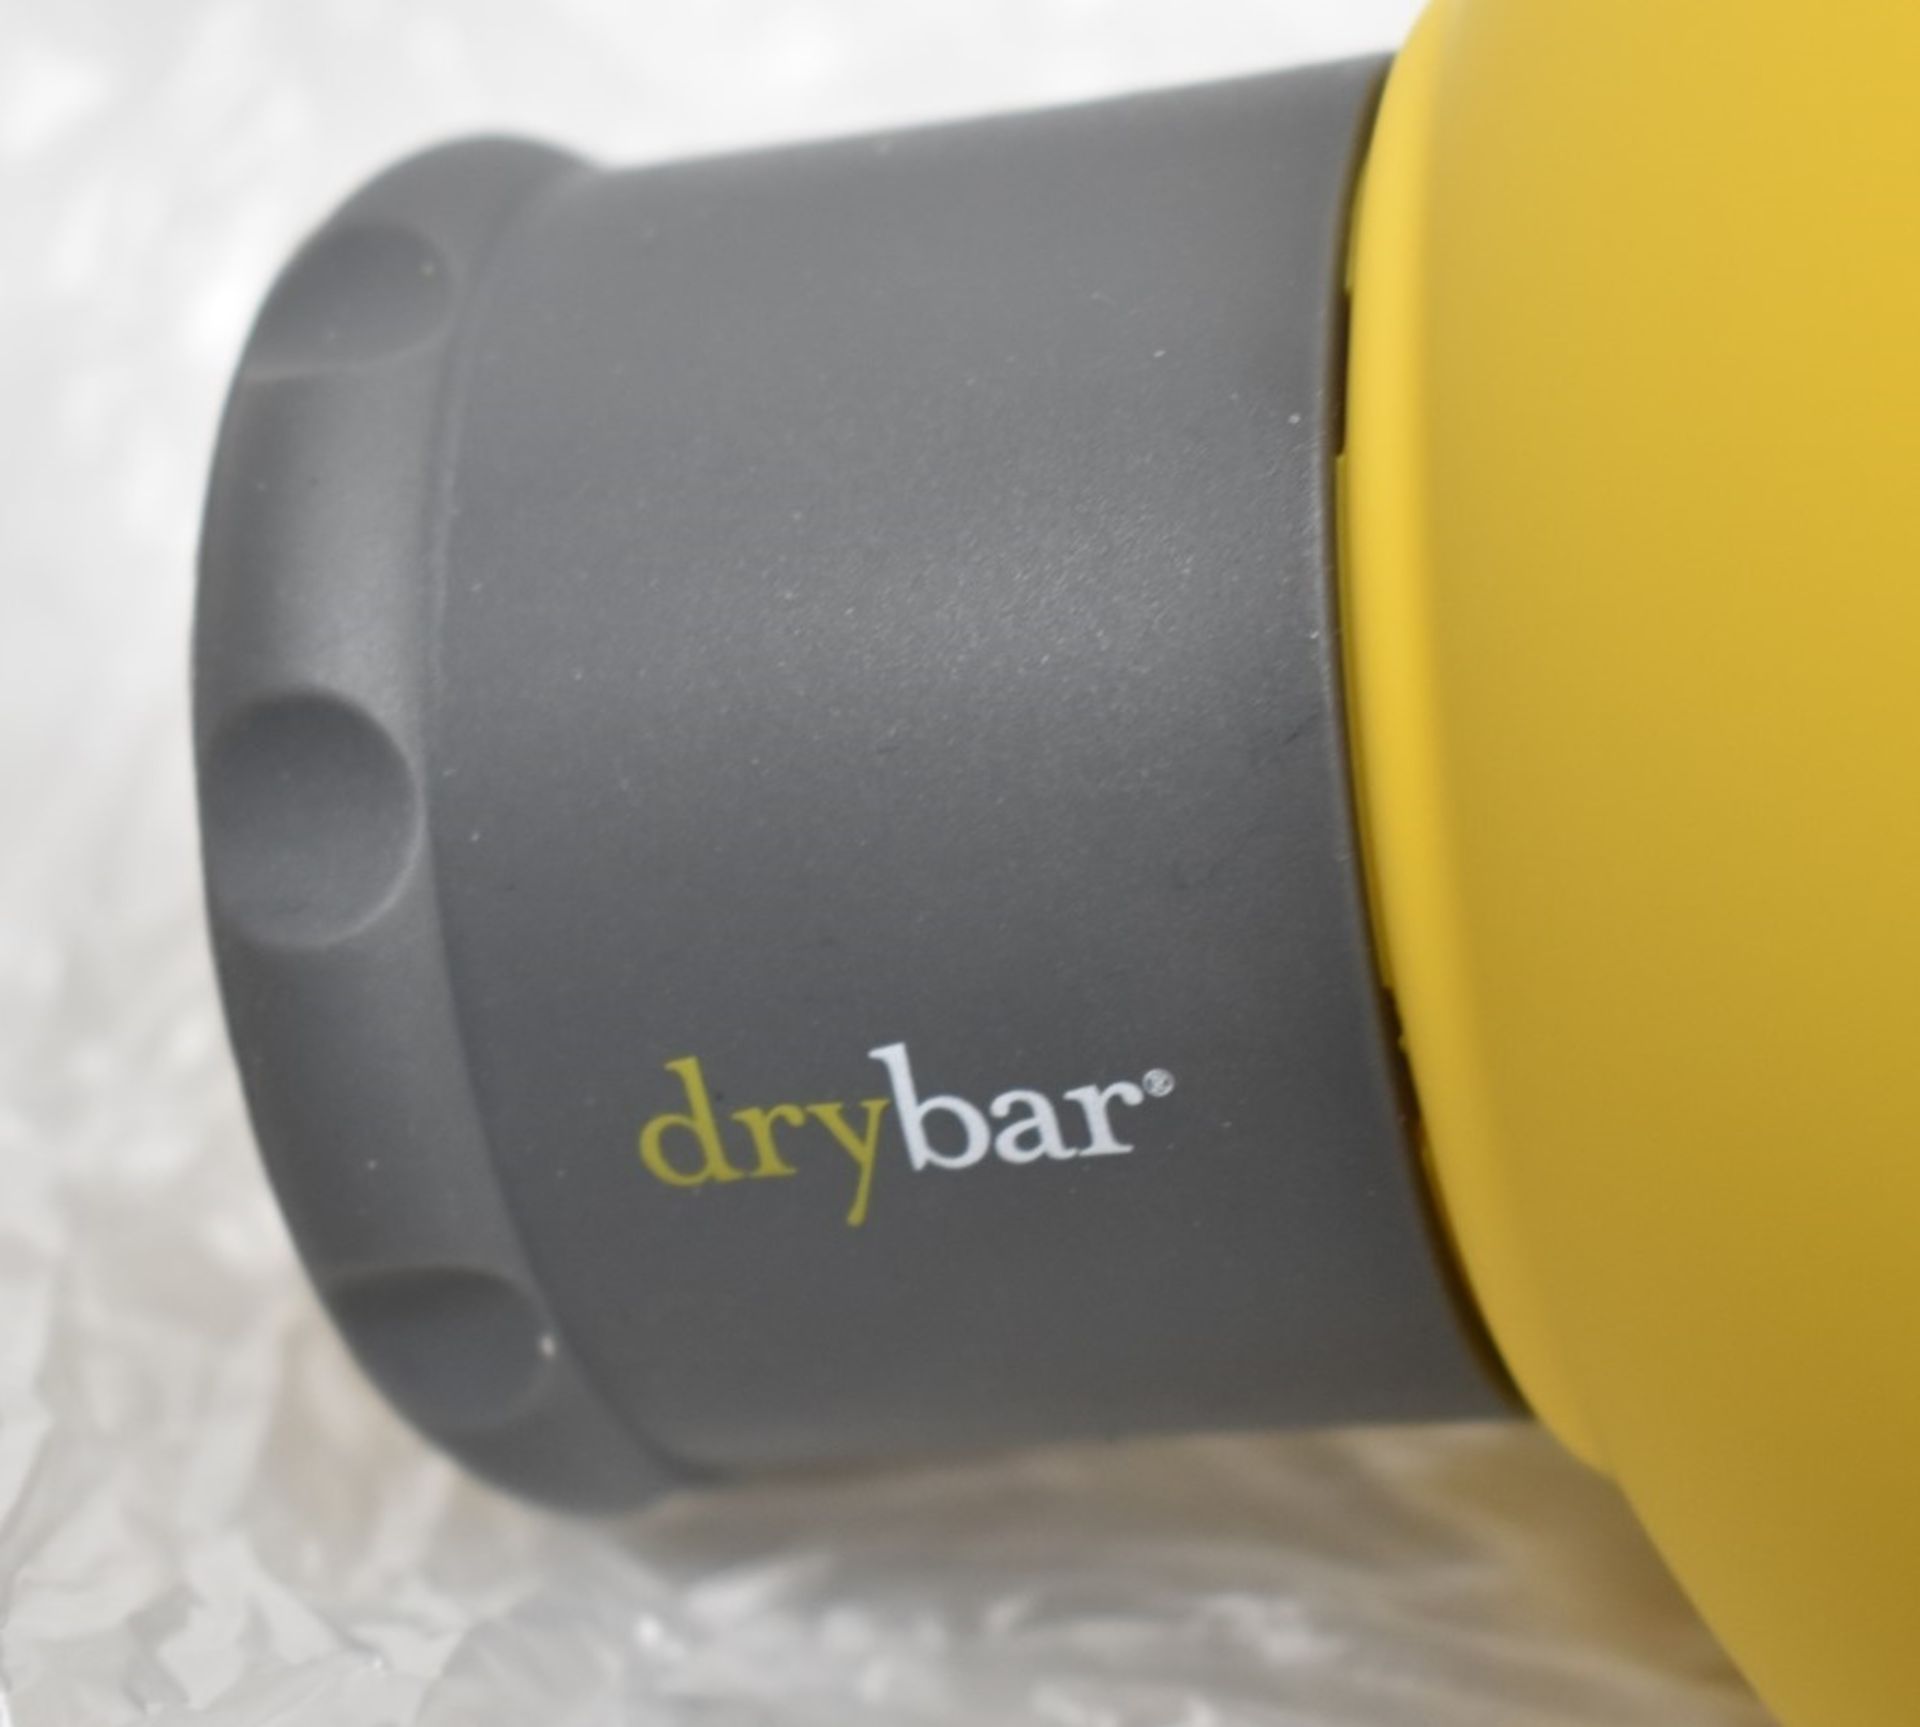 1 x DRYBAR The Bouncer Diffuser - Unused Boxed Stock - Ref: 6832450/HAS2246/WH2-C7/02-23-2 - CL987 - - Image 7 of 9